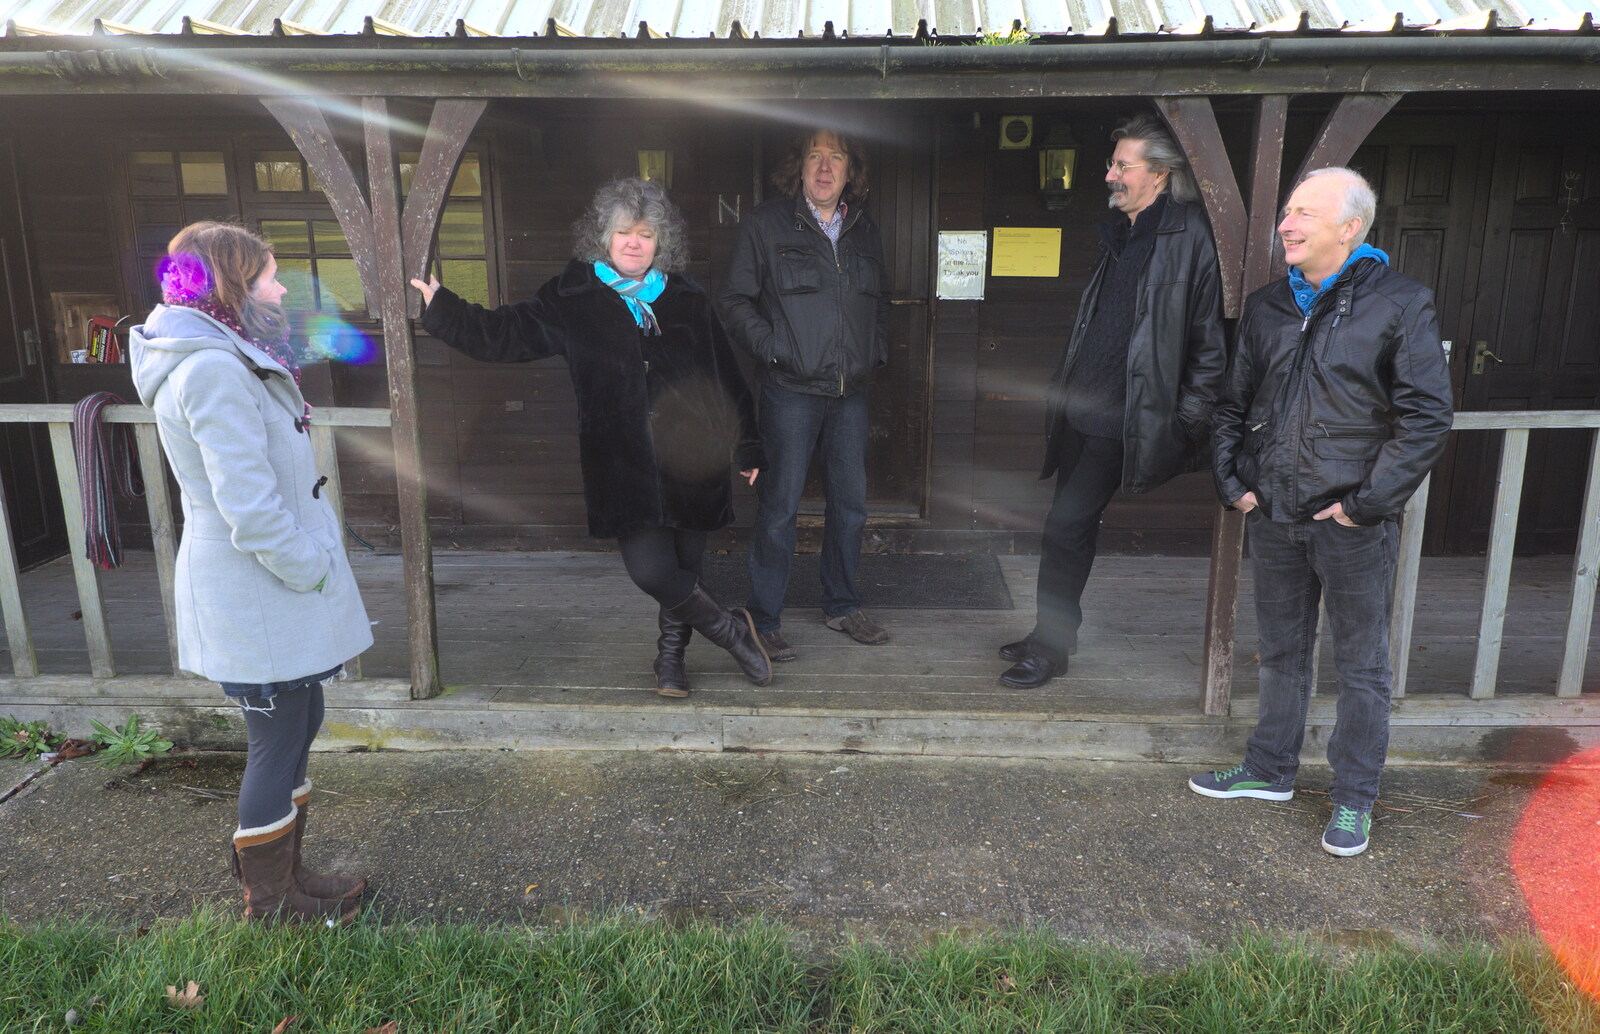 Isobel makes an appearance from The BBs Photo Shoot, BOCM Pauls Pavilion, Burston, Norfolk - 12th January 2014